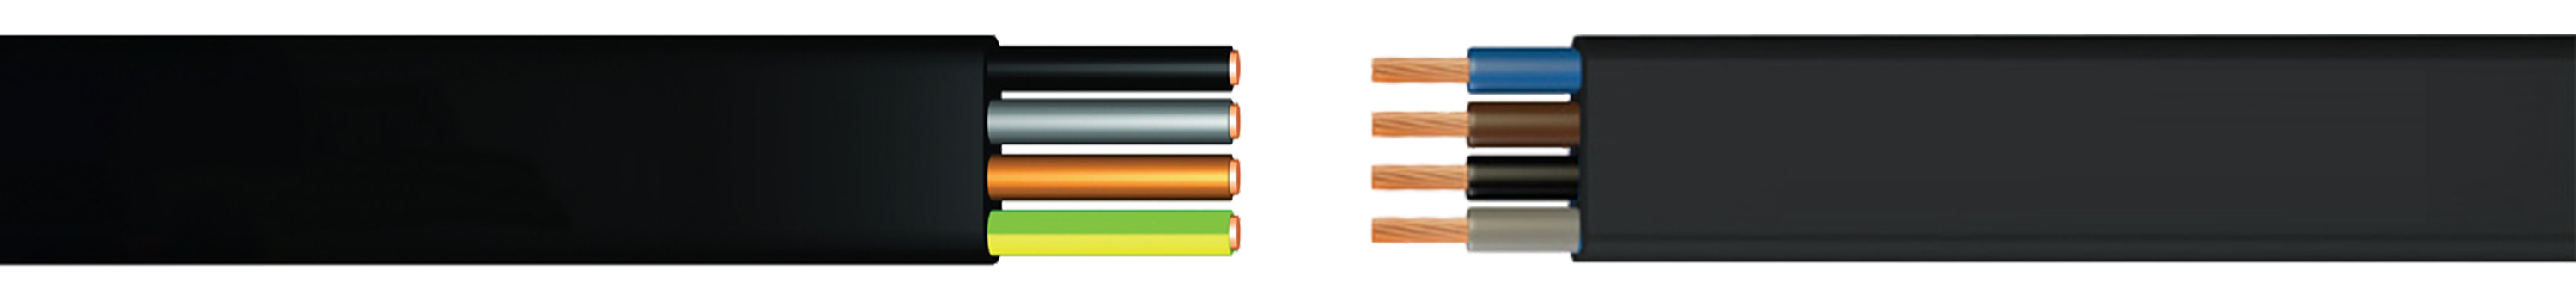 PCP-OR-EQUIVALENT-SYNTHETIC-ELASTOMER-SHEATHED-FLEXIBLE-FLAT-CABLE-H07RNH6-F